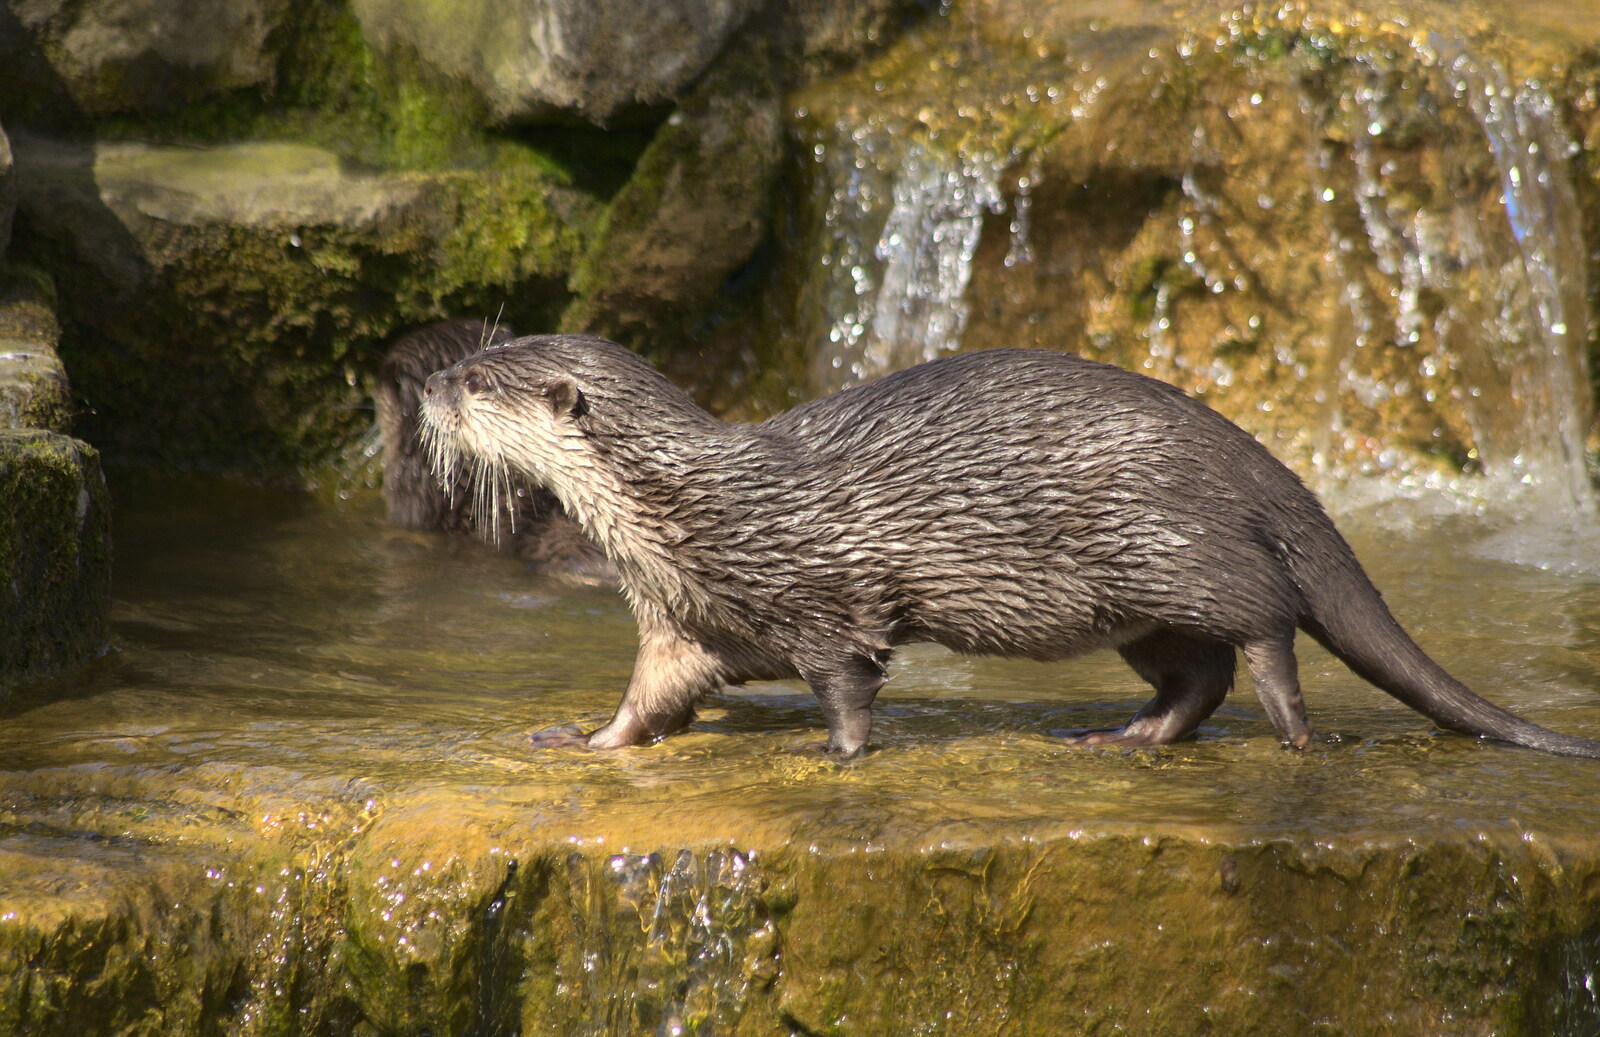 An otter goes for a walk from Another Trip to Banham Zoo, Banham, Norfolk - 25th March 2016